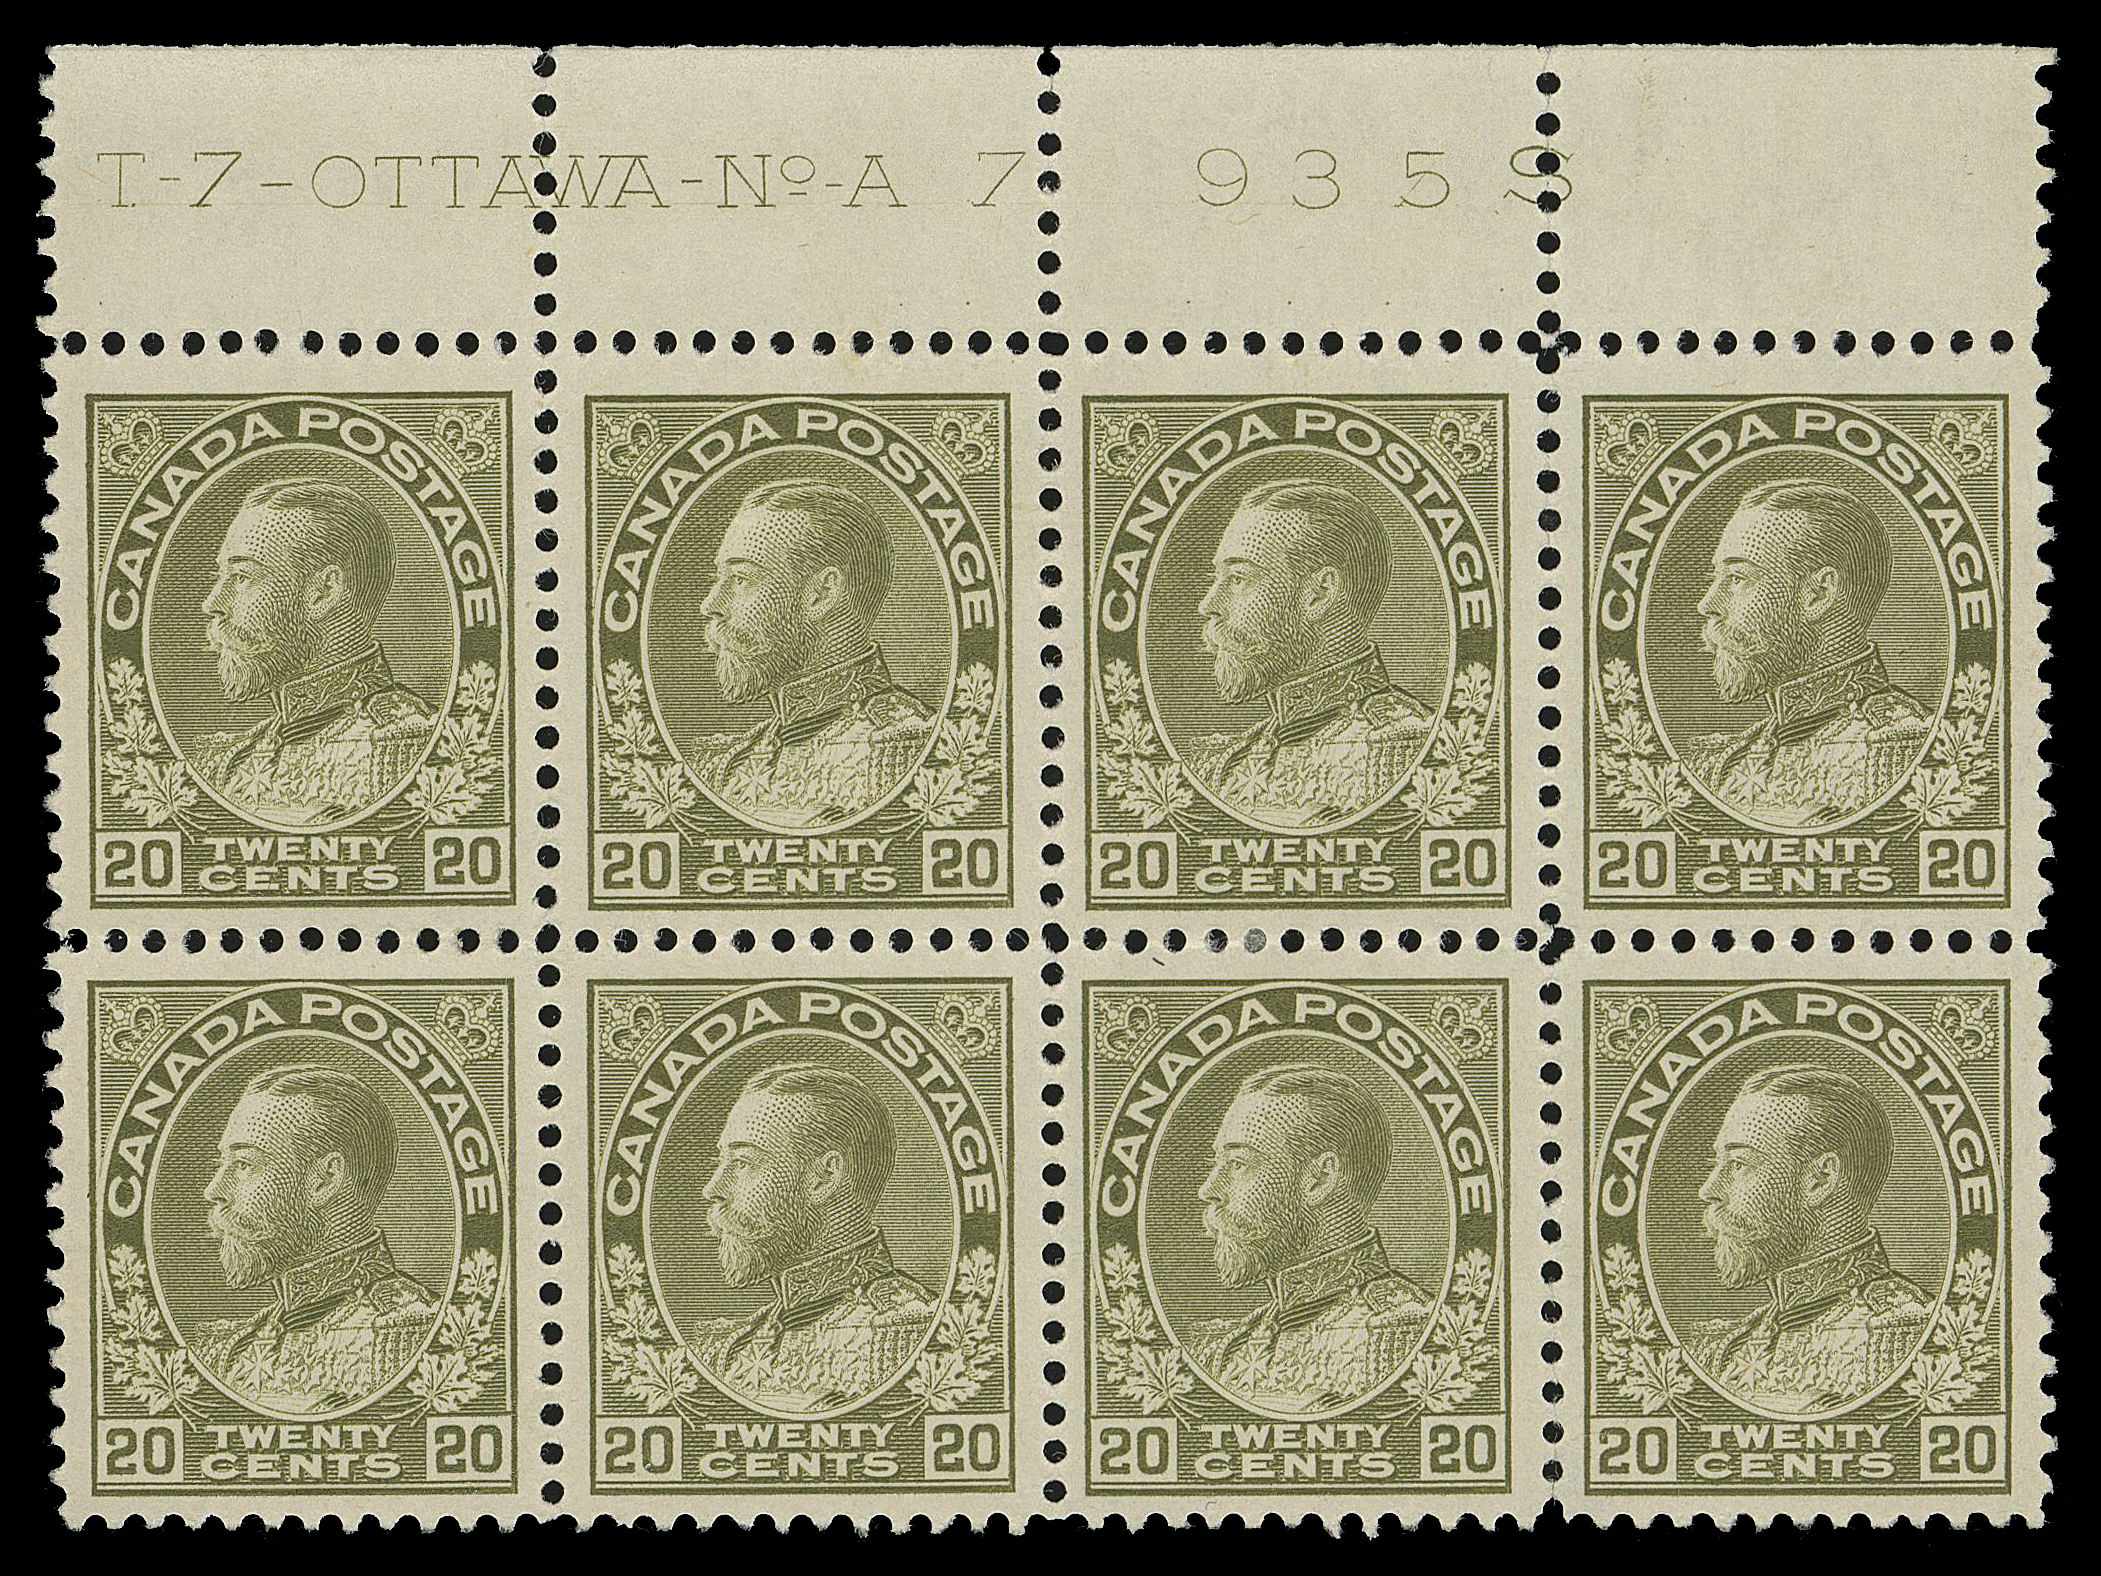 ADMIRAL STAMPS  119,A very scarce, well centered Plate 7 block of eight, brilliant colour, perf separation between third and fourth columns, tiny thin on lower right stamp, LH in selvedge and two stamps in third column, five stamps NH. A beautiful plate block especially desirable with such superior centering, VF+ (Unitrade cat. $2,700)

Provenance: George Marler, Maresch Sale 144, September 1982; Lot 509